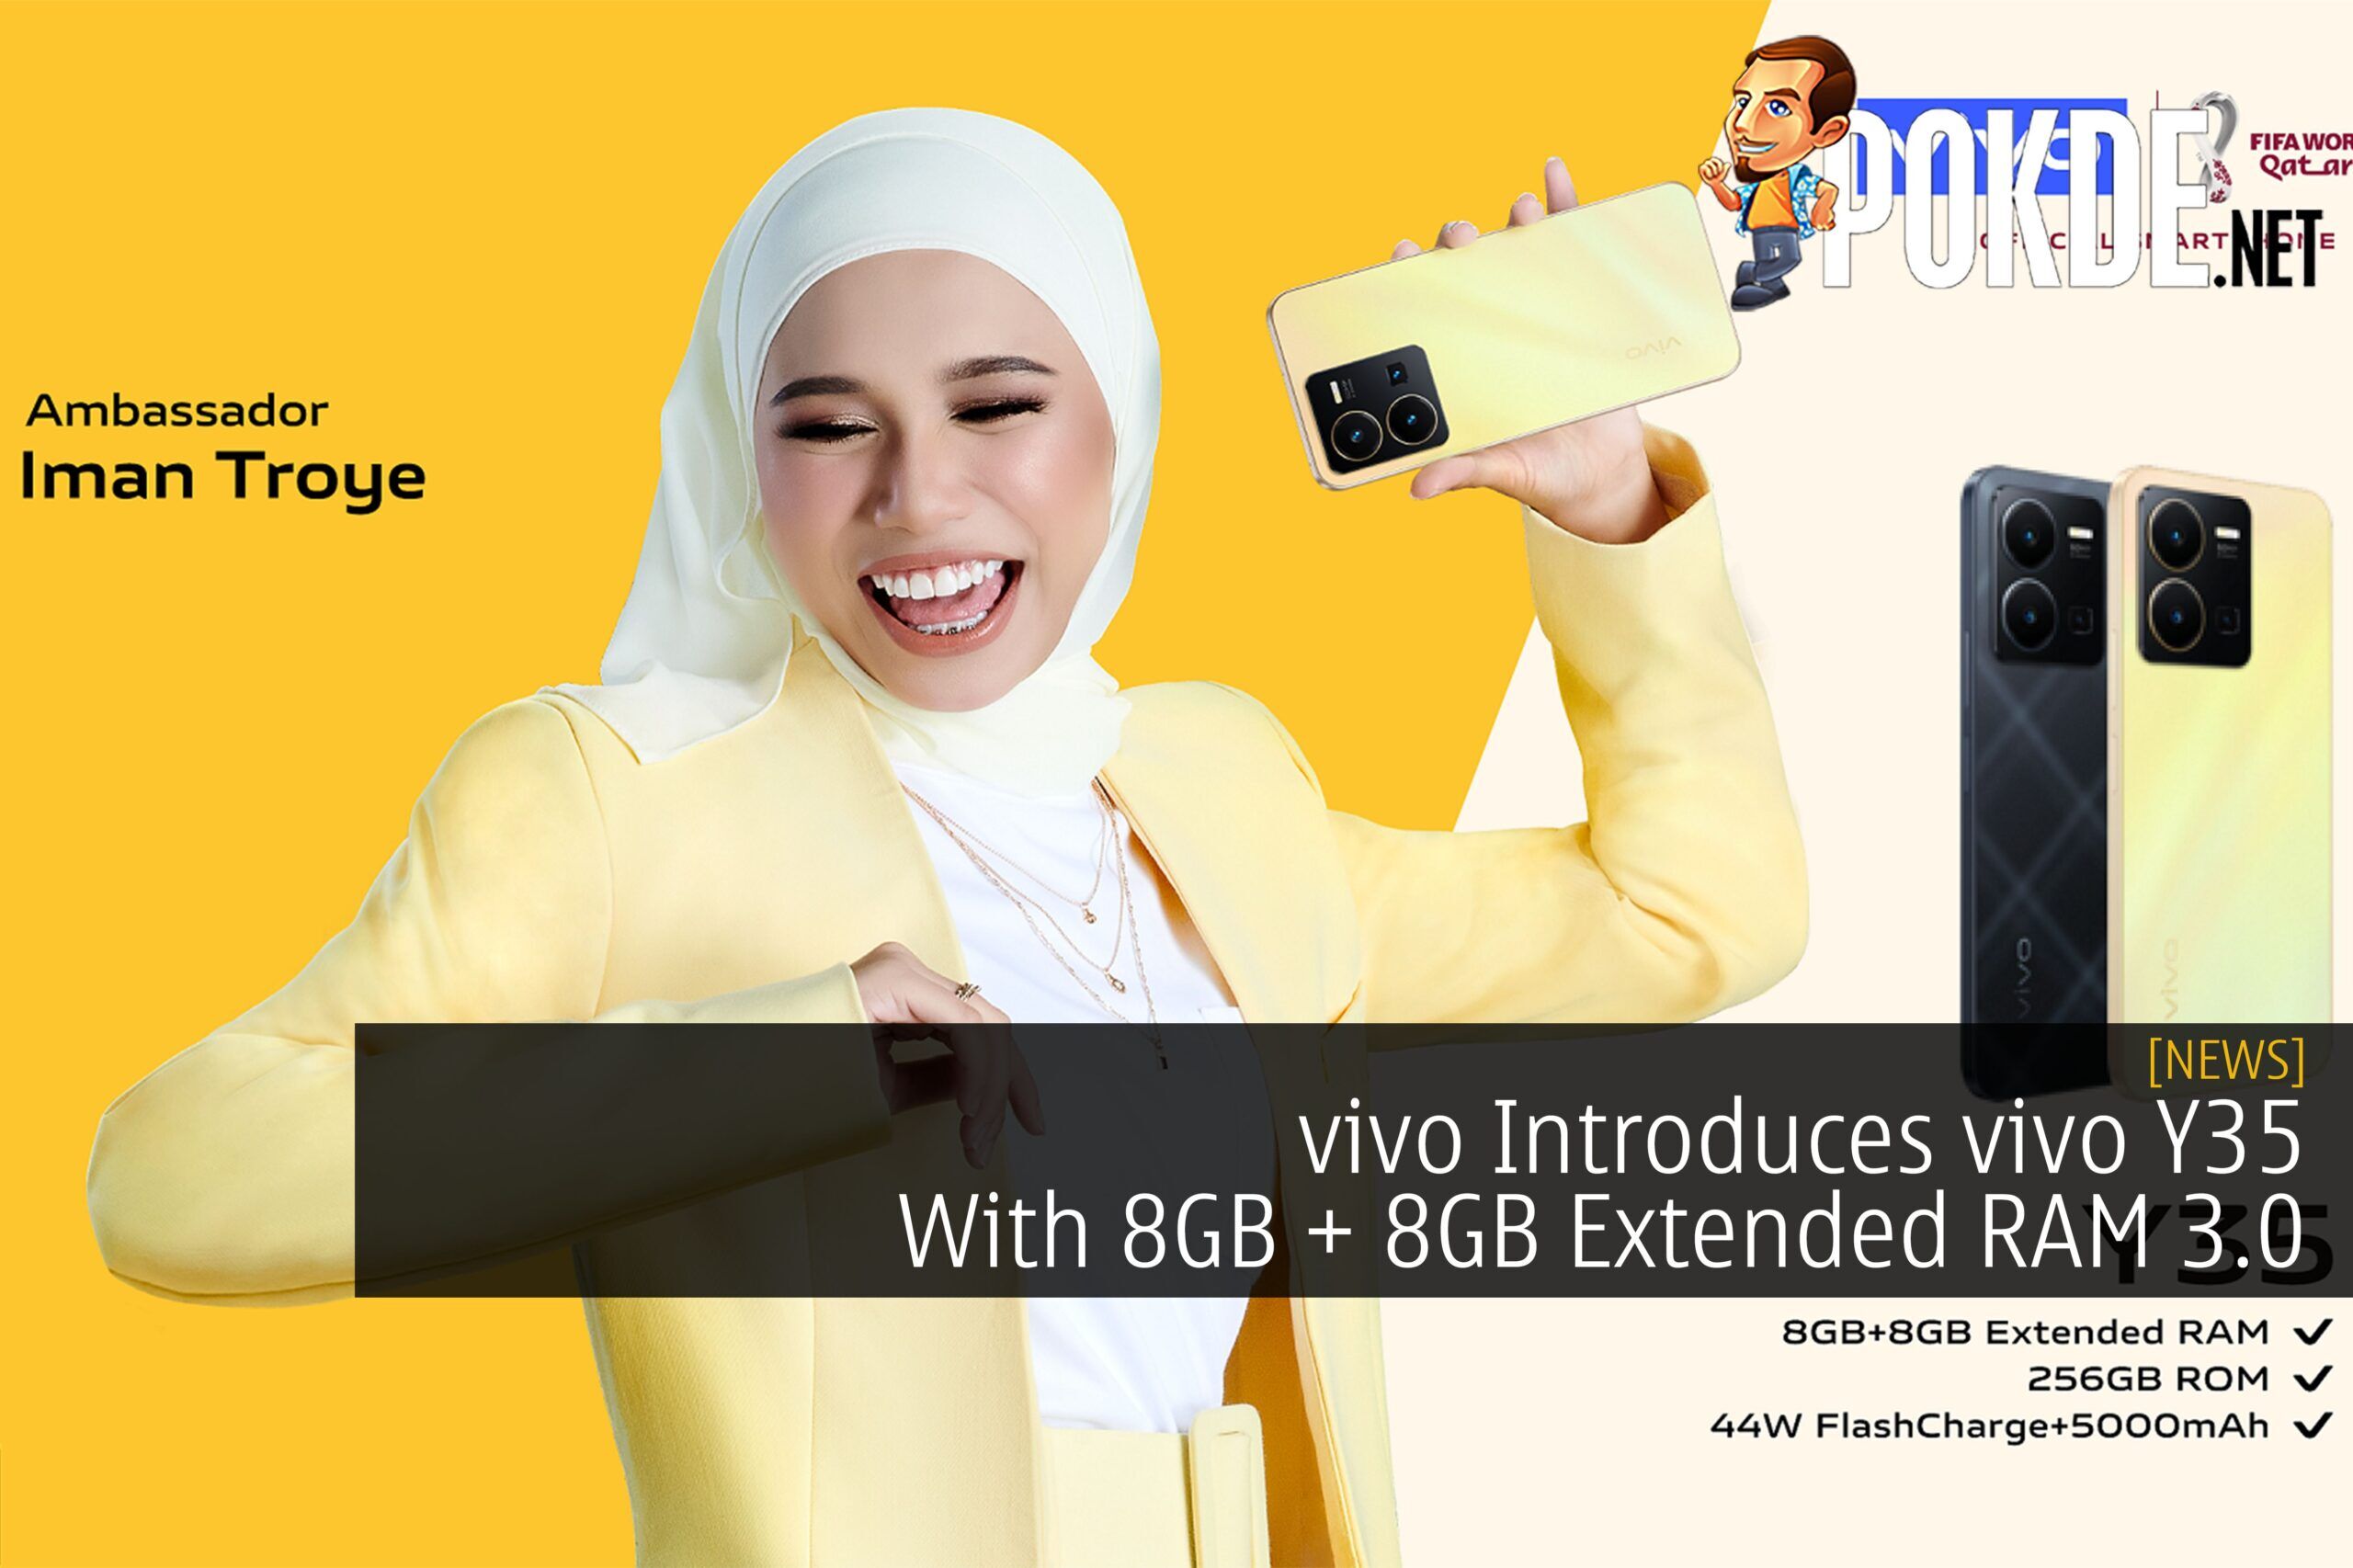 vivo Introduces vivo Y35 With 8GB + 8GB Extended RAM 3.0